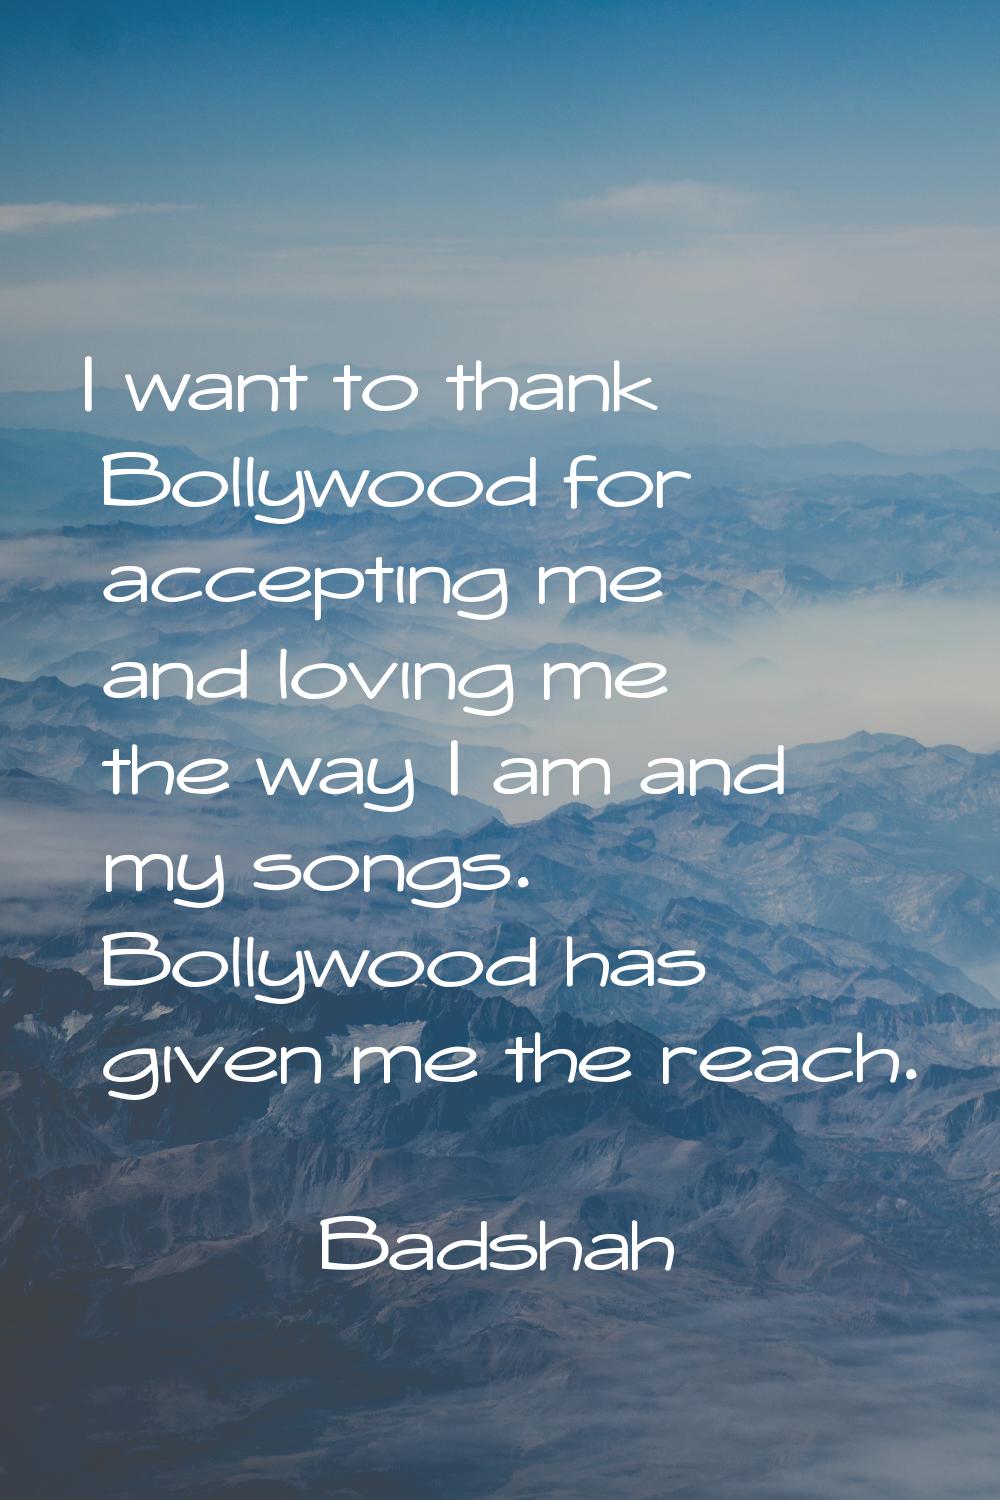 I want to thank Bollywood for accepting me and loving me the way I am and my songs. Bollywood has g